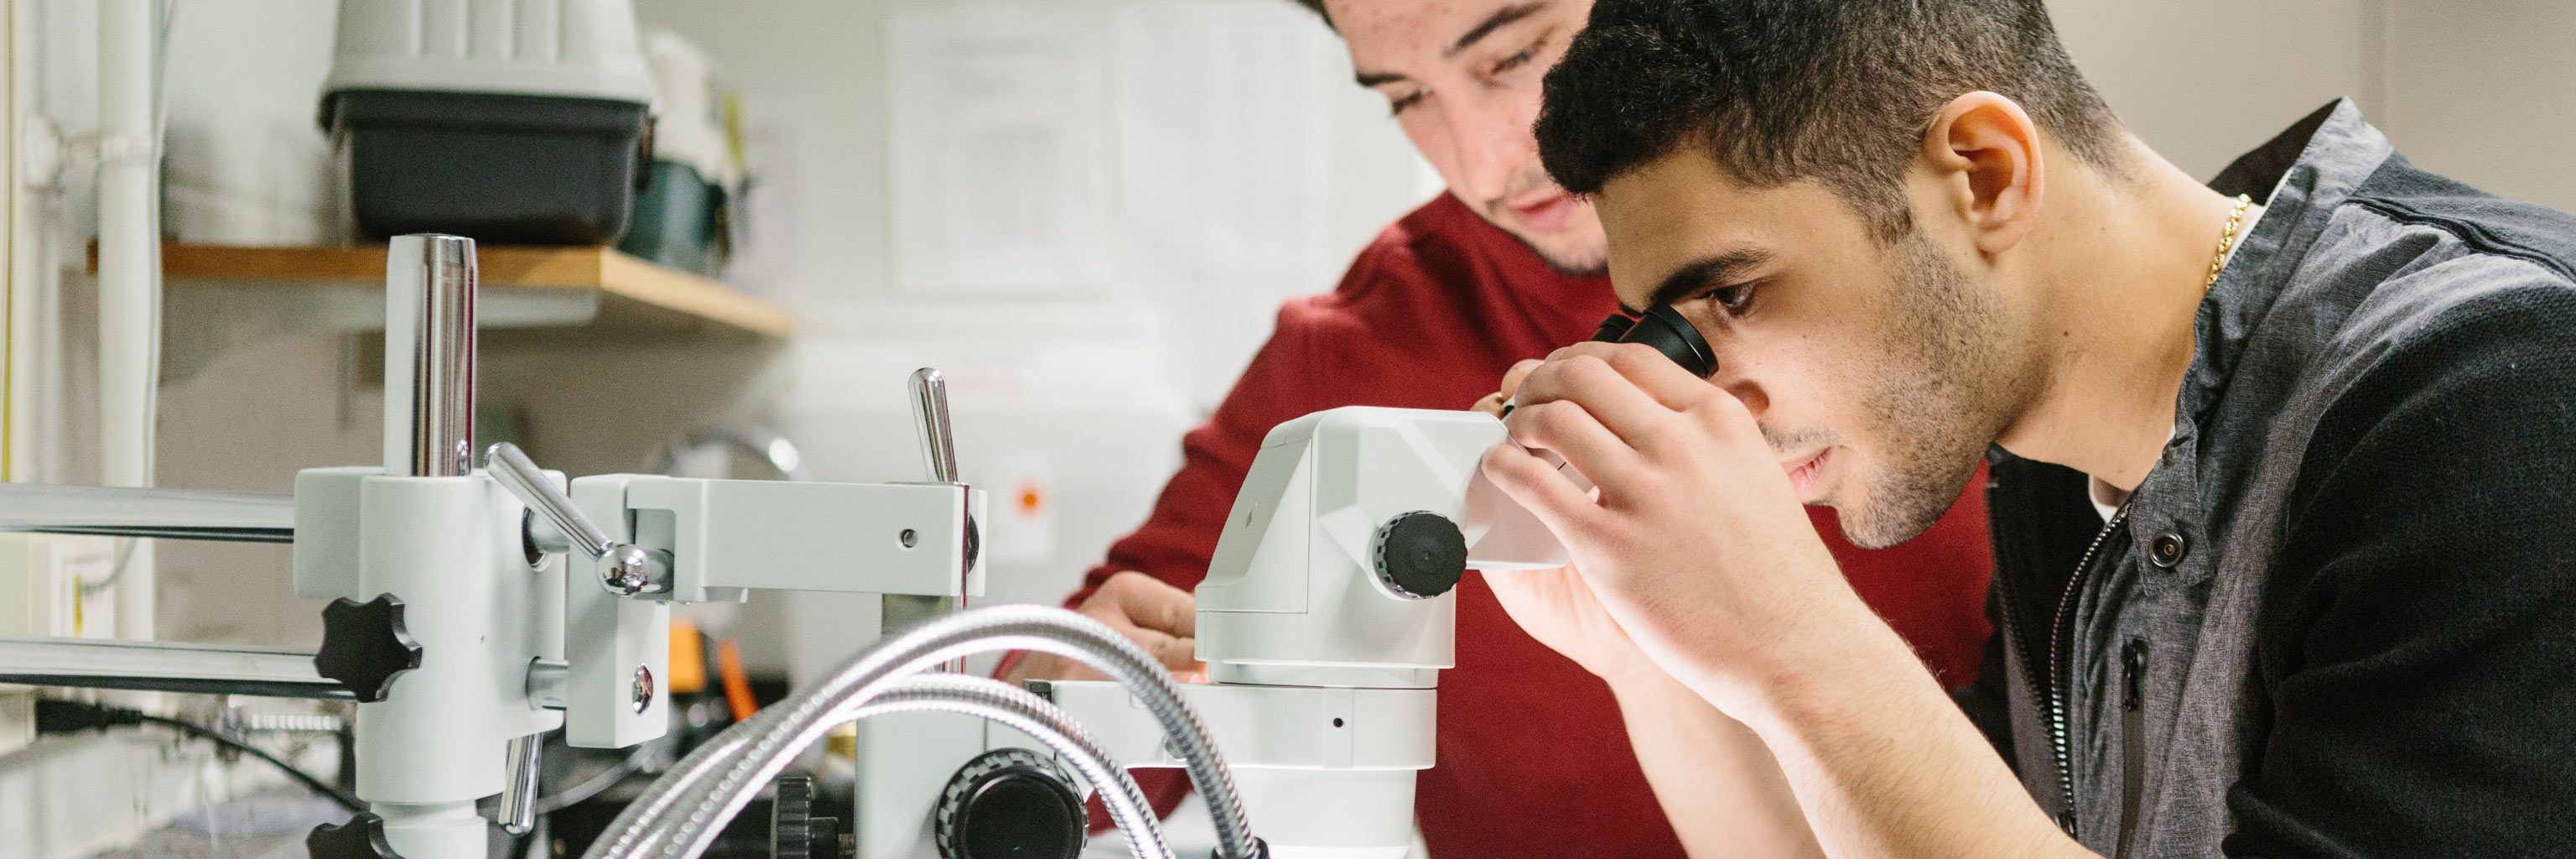 two men looking through microscope in a lab